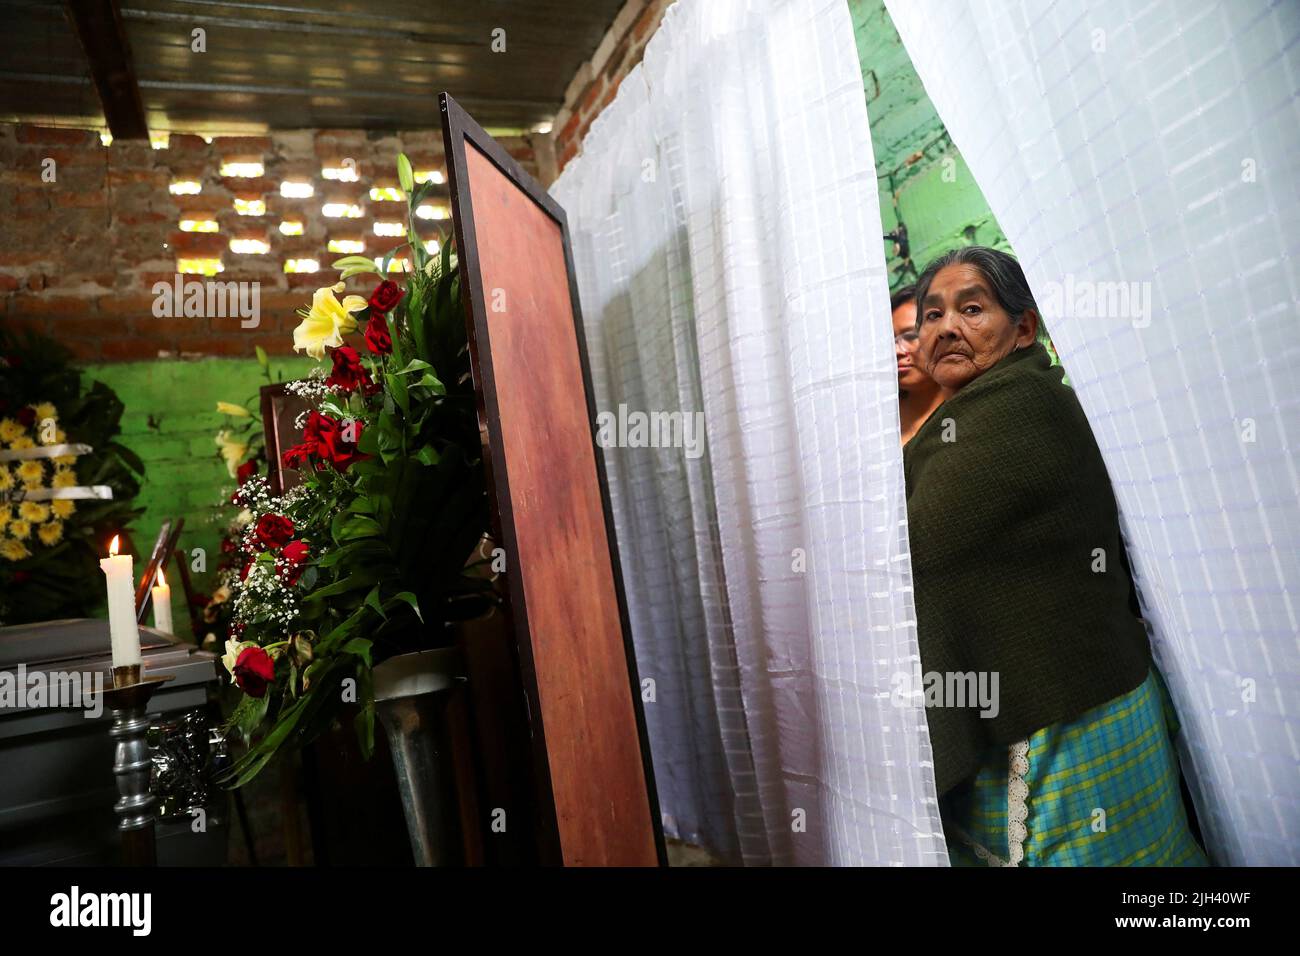 A woman looks on during the wake of the late migrant Jose Lopez, 34, after being repatriated from San Antonio, Texas, U.S., at his family's home in Celaya, in Guanajuato state, Mexico July 14, 2022. REUTERS/Edgard Garrido Stock Photo